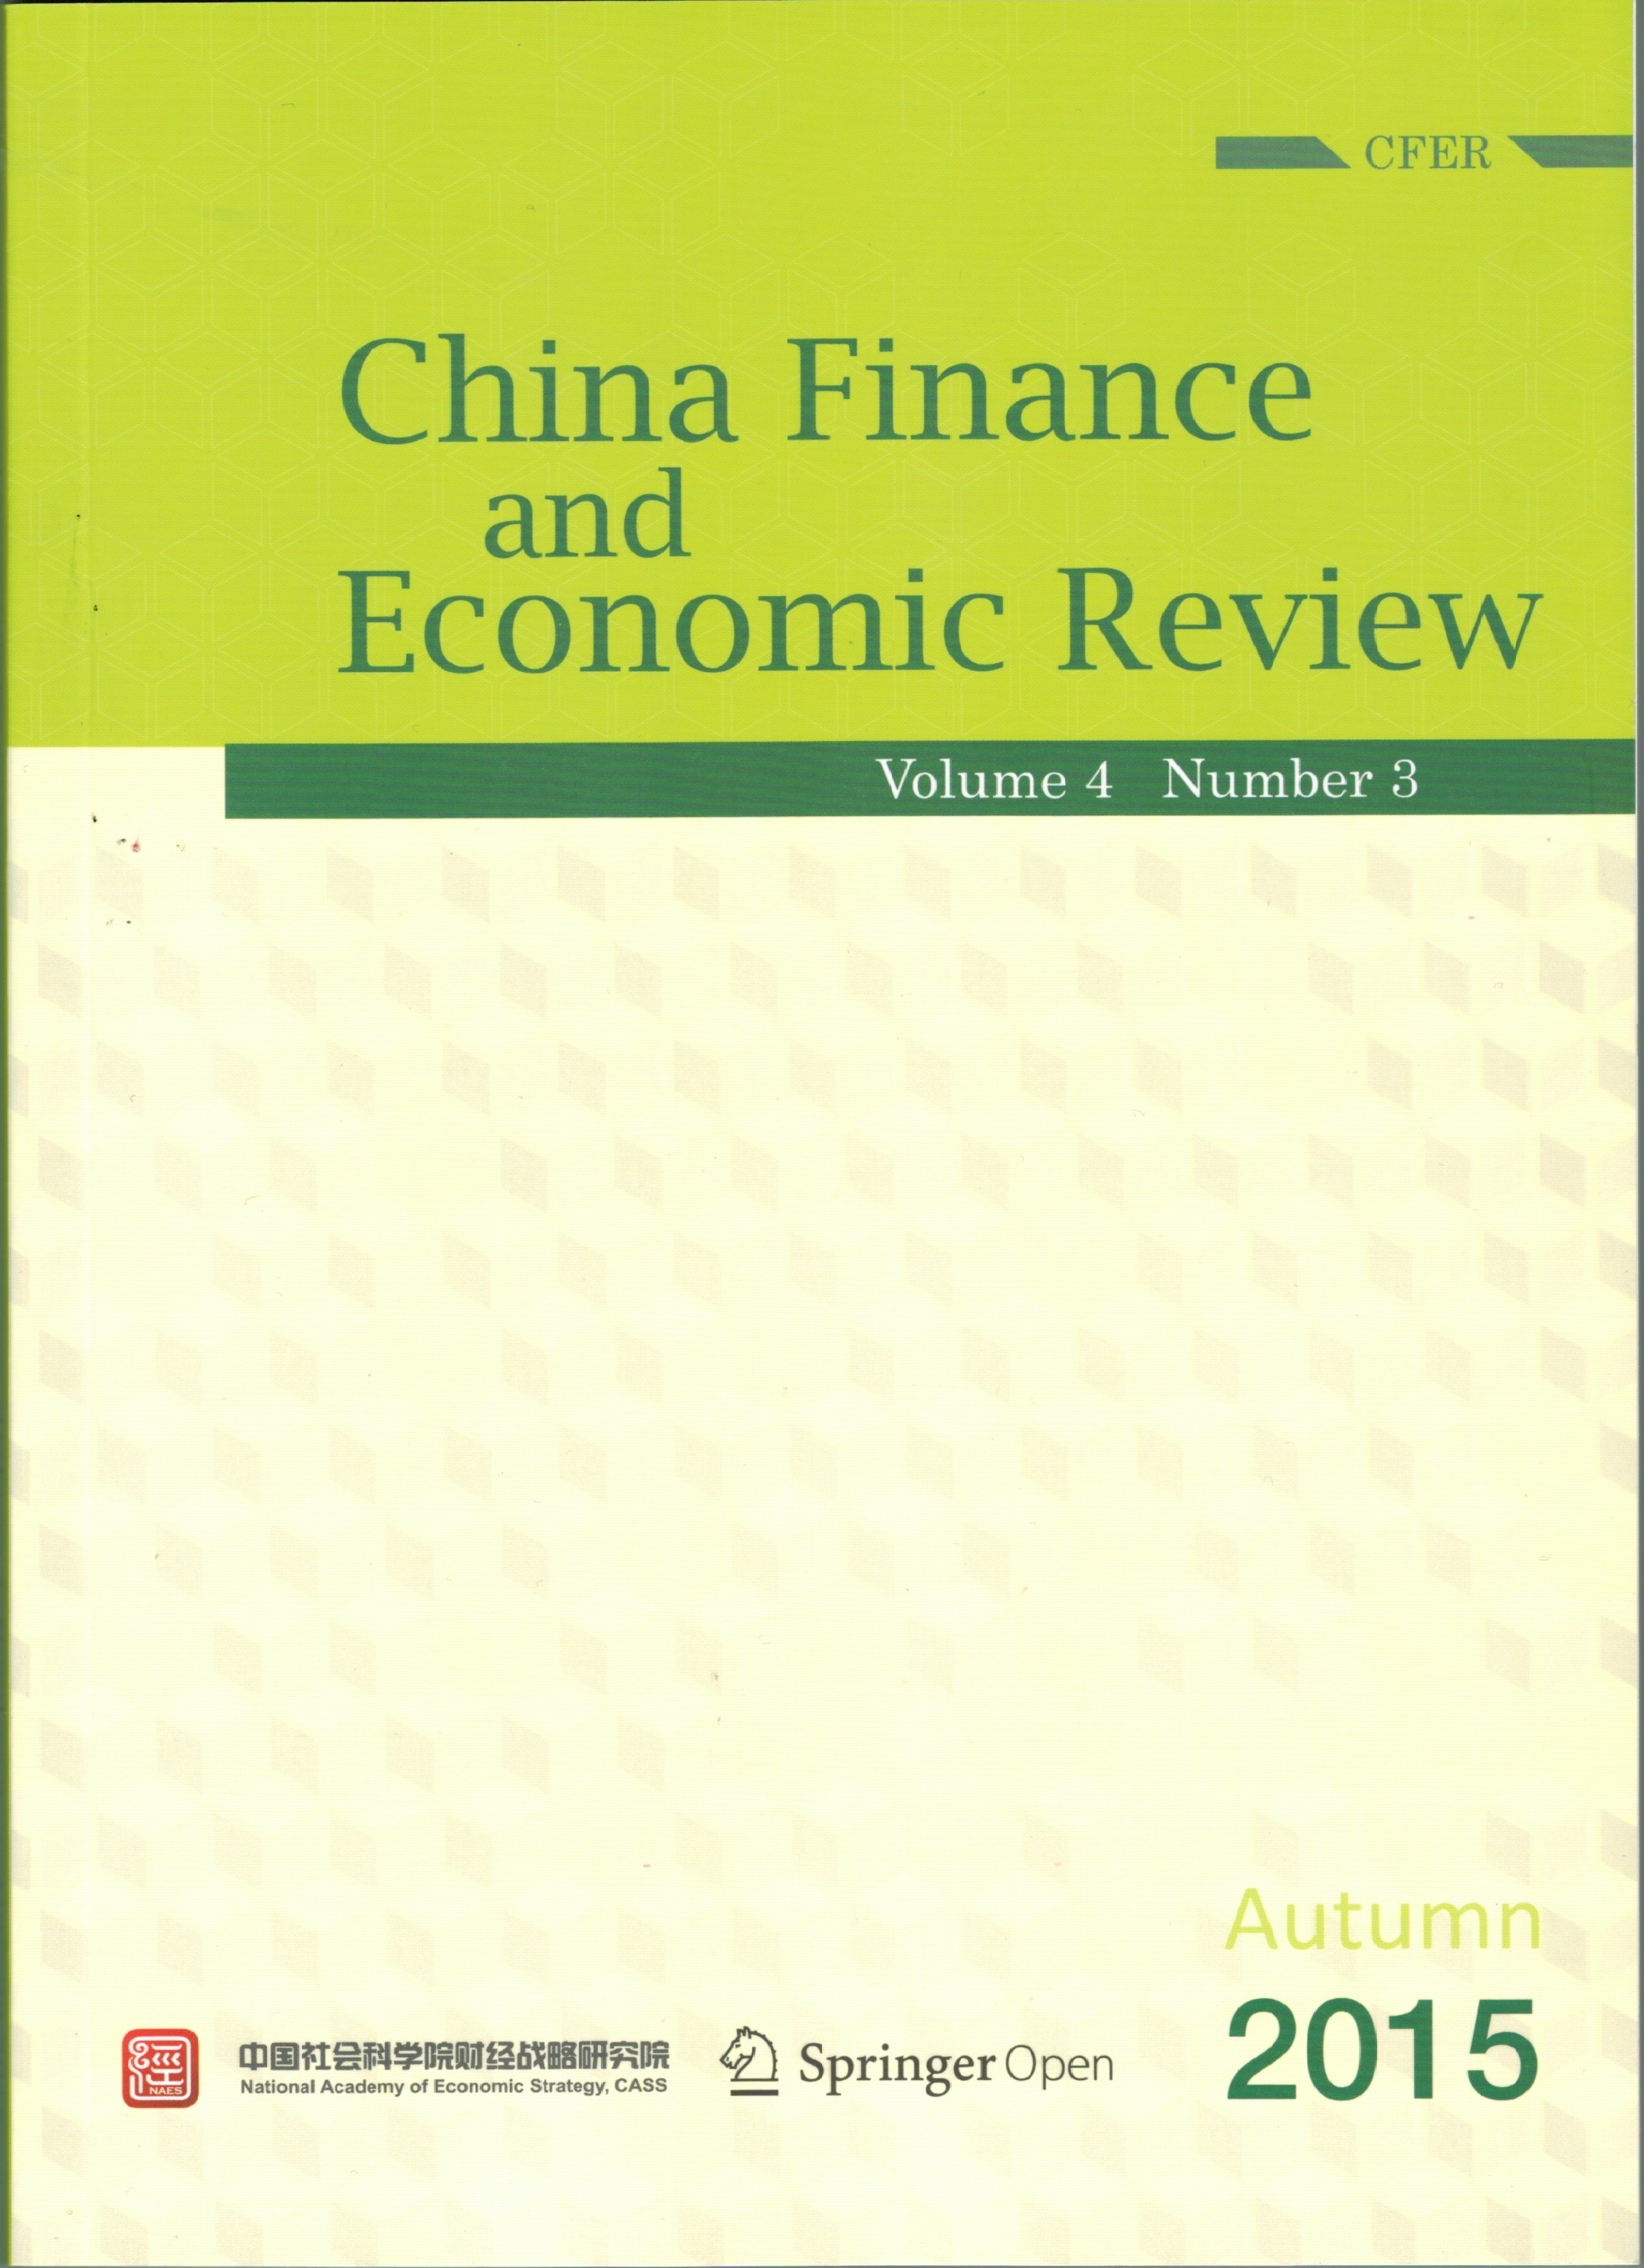 China Finance and Economic Review